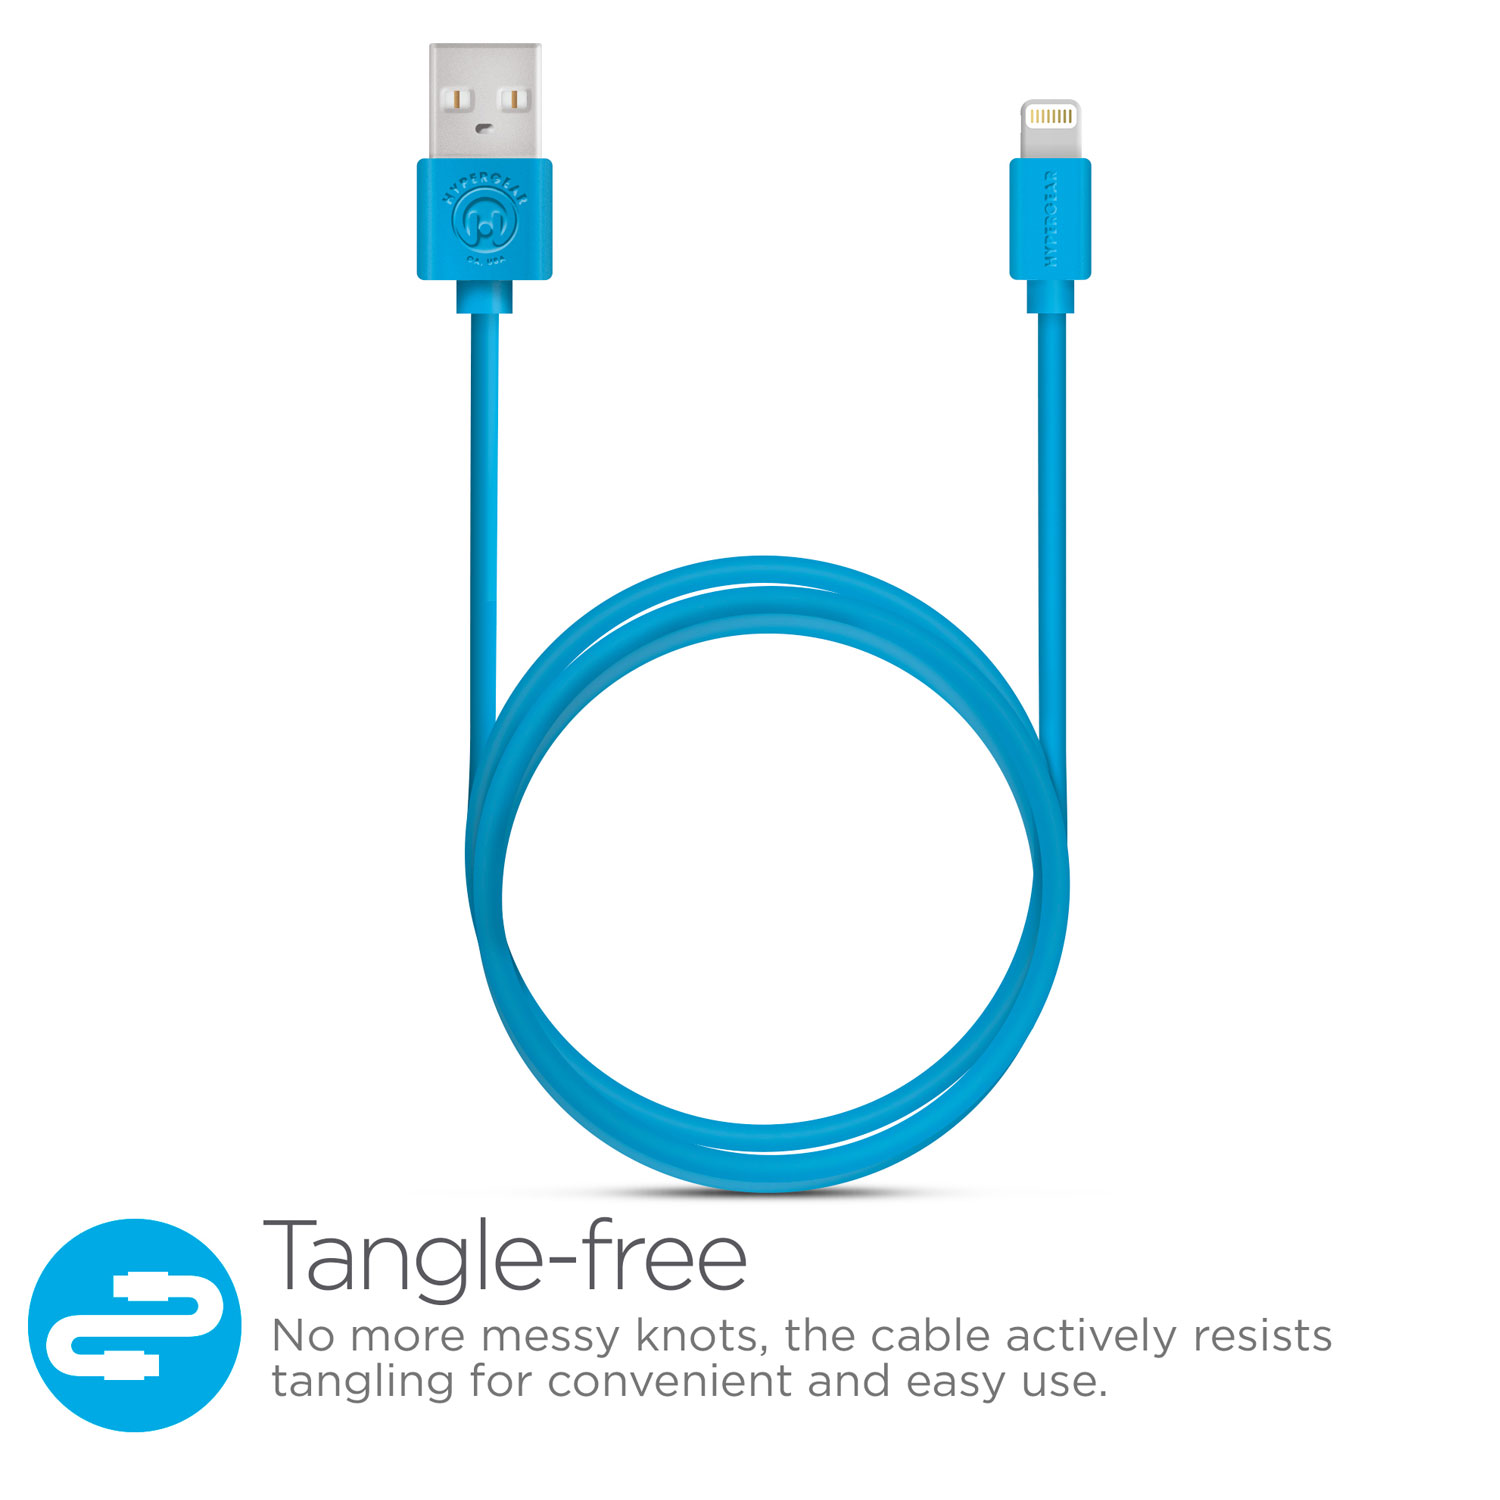 MFi Lightning 4ft. Charge & Sync Cable